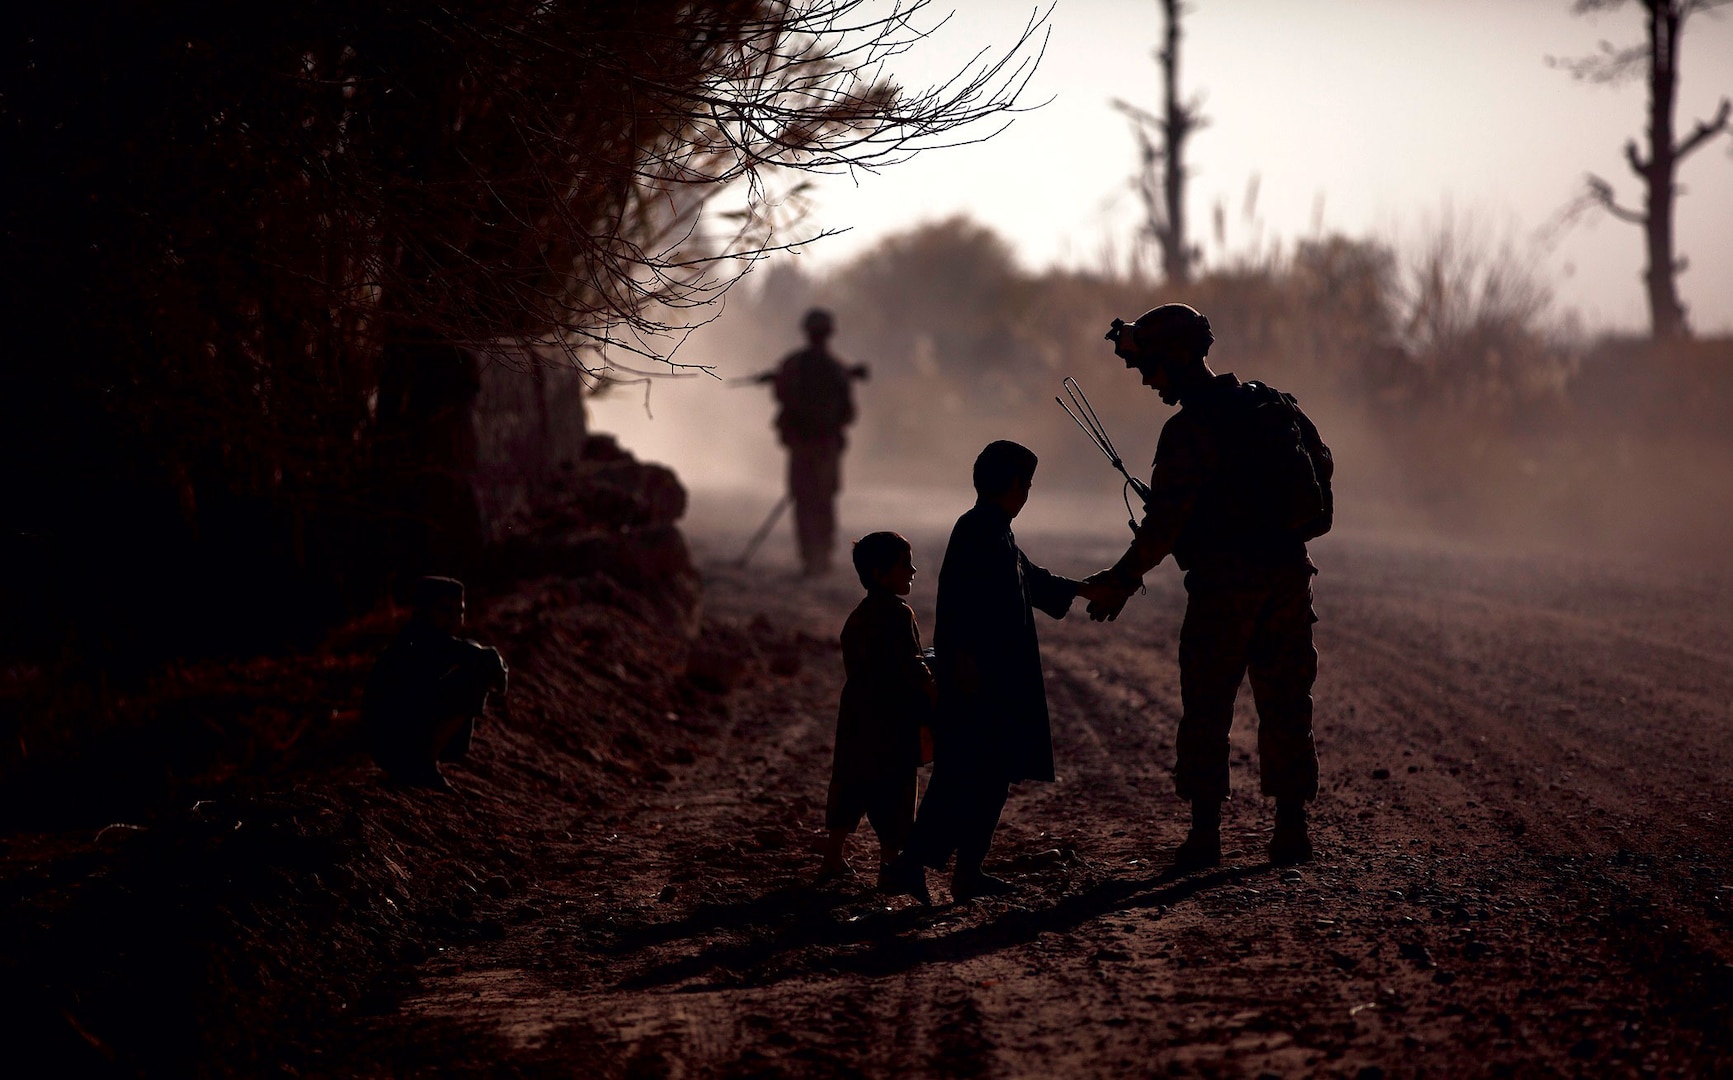 In 2011, a U.S. marine greets local children during a partnered security patrol with Afghan National Army soldiers in Helmand Province, Afghanistan. The marines aided Afghan National Security Forces in assuming security responsibilities; their interoperability is designed to further the expansion of stability, development, and legitimate governance by defeating insurgent forces and helping to secure the Afghan people. (DOD)